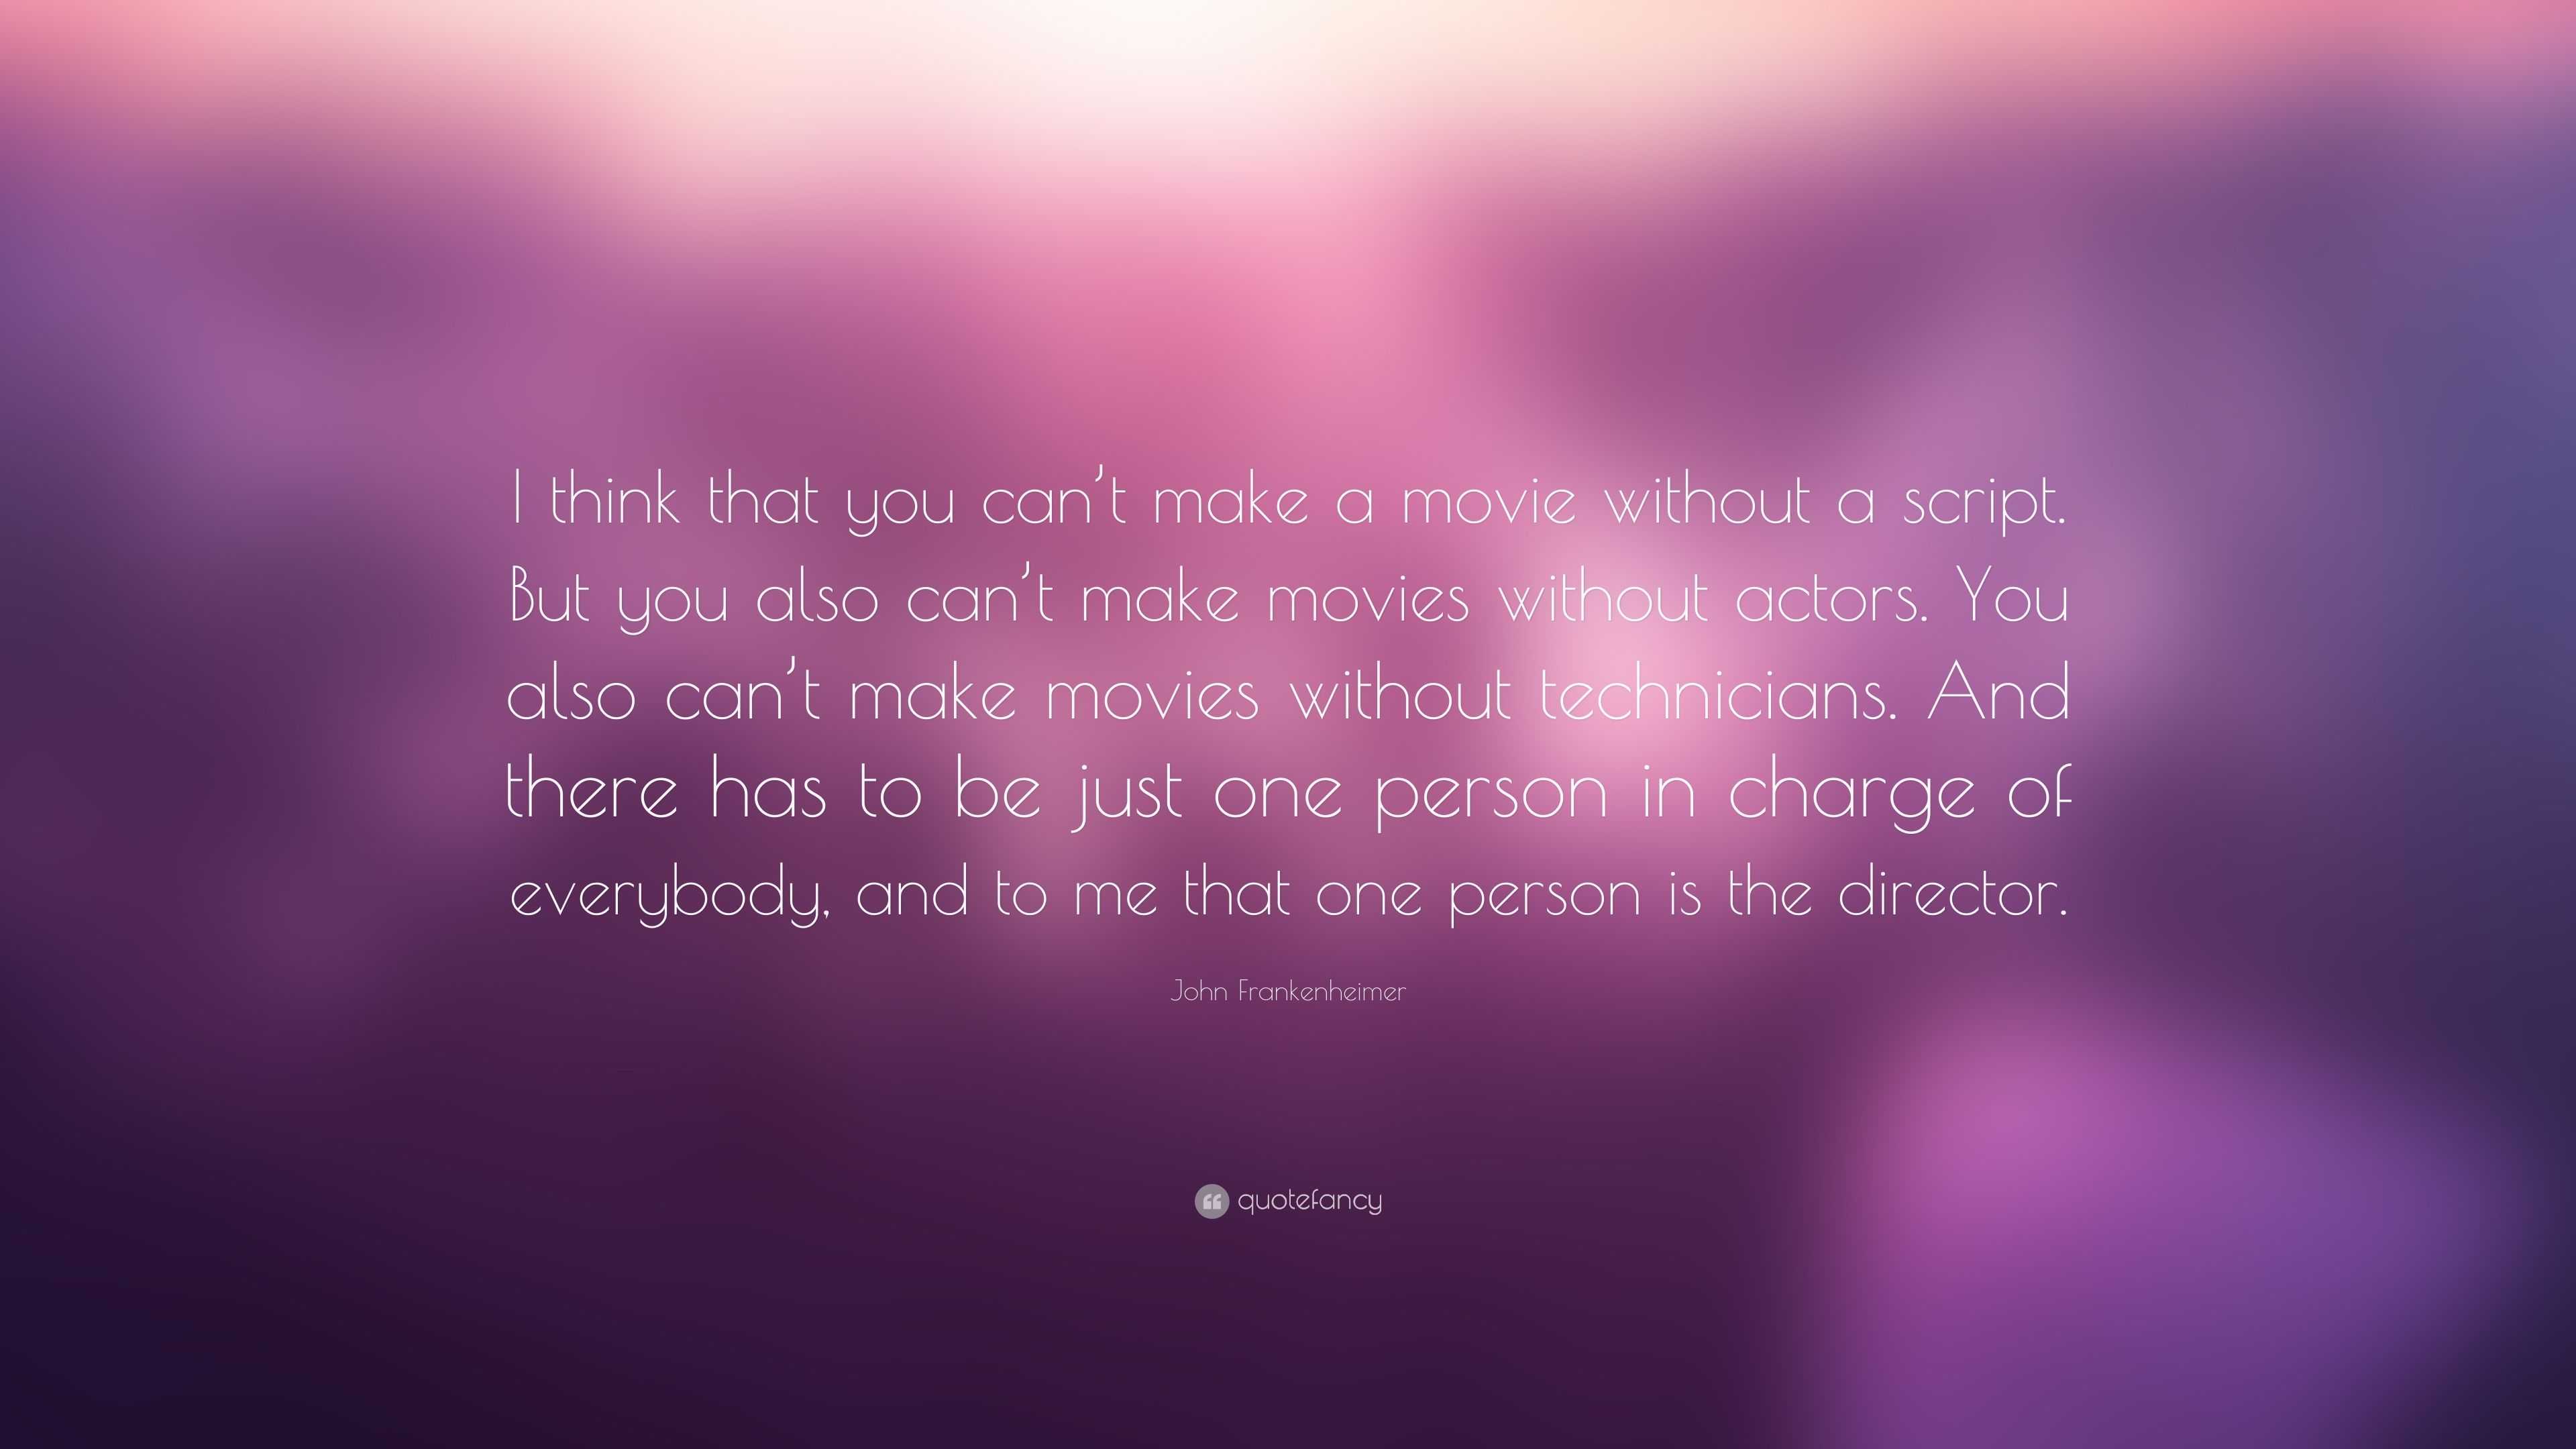 John Frankenheimer Quote: “I think that you can’t make a movie without ...